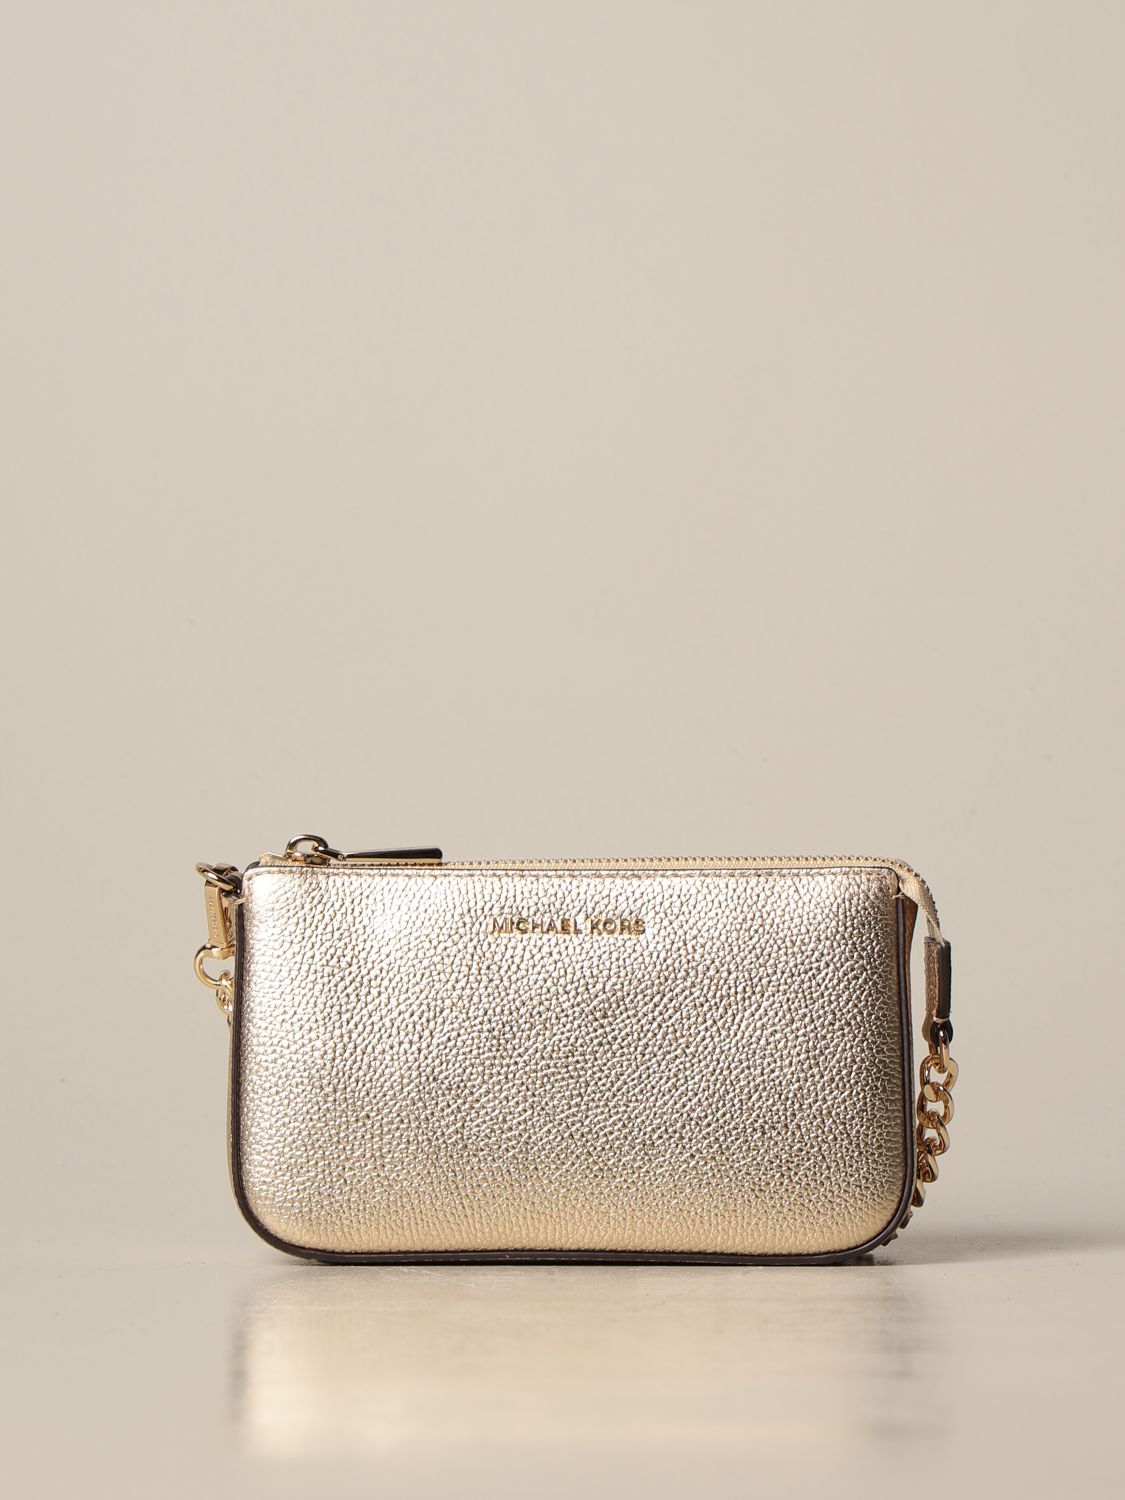 Michael Michael Kors chain clutch in laminated leather